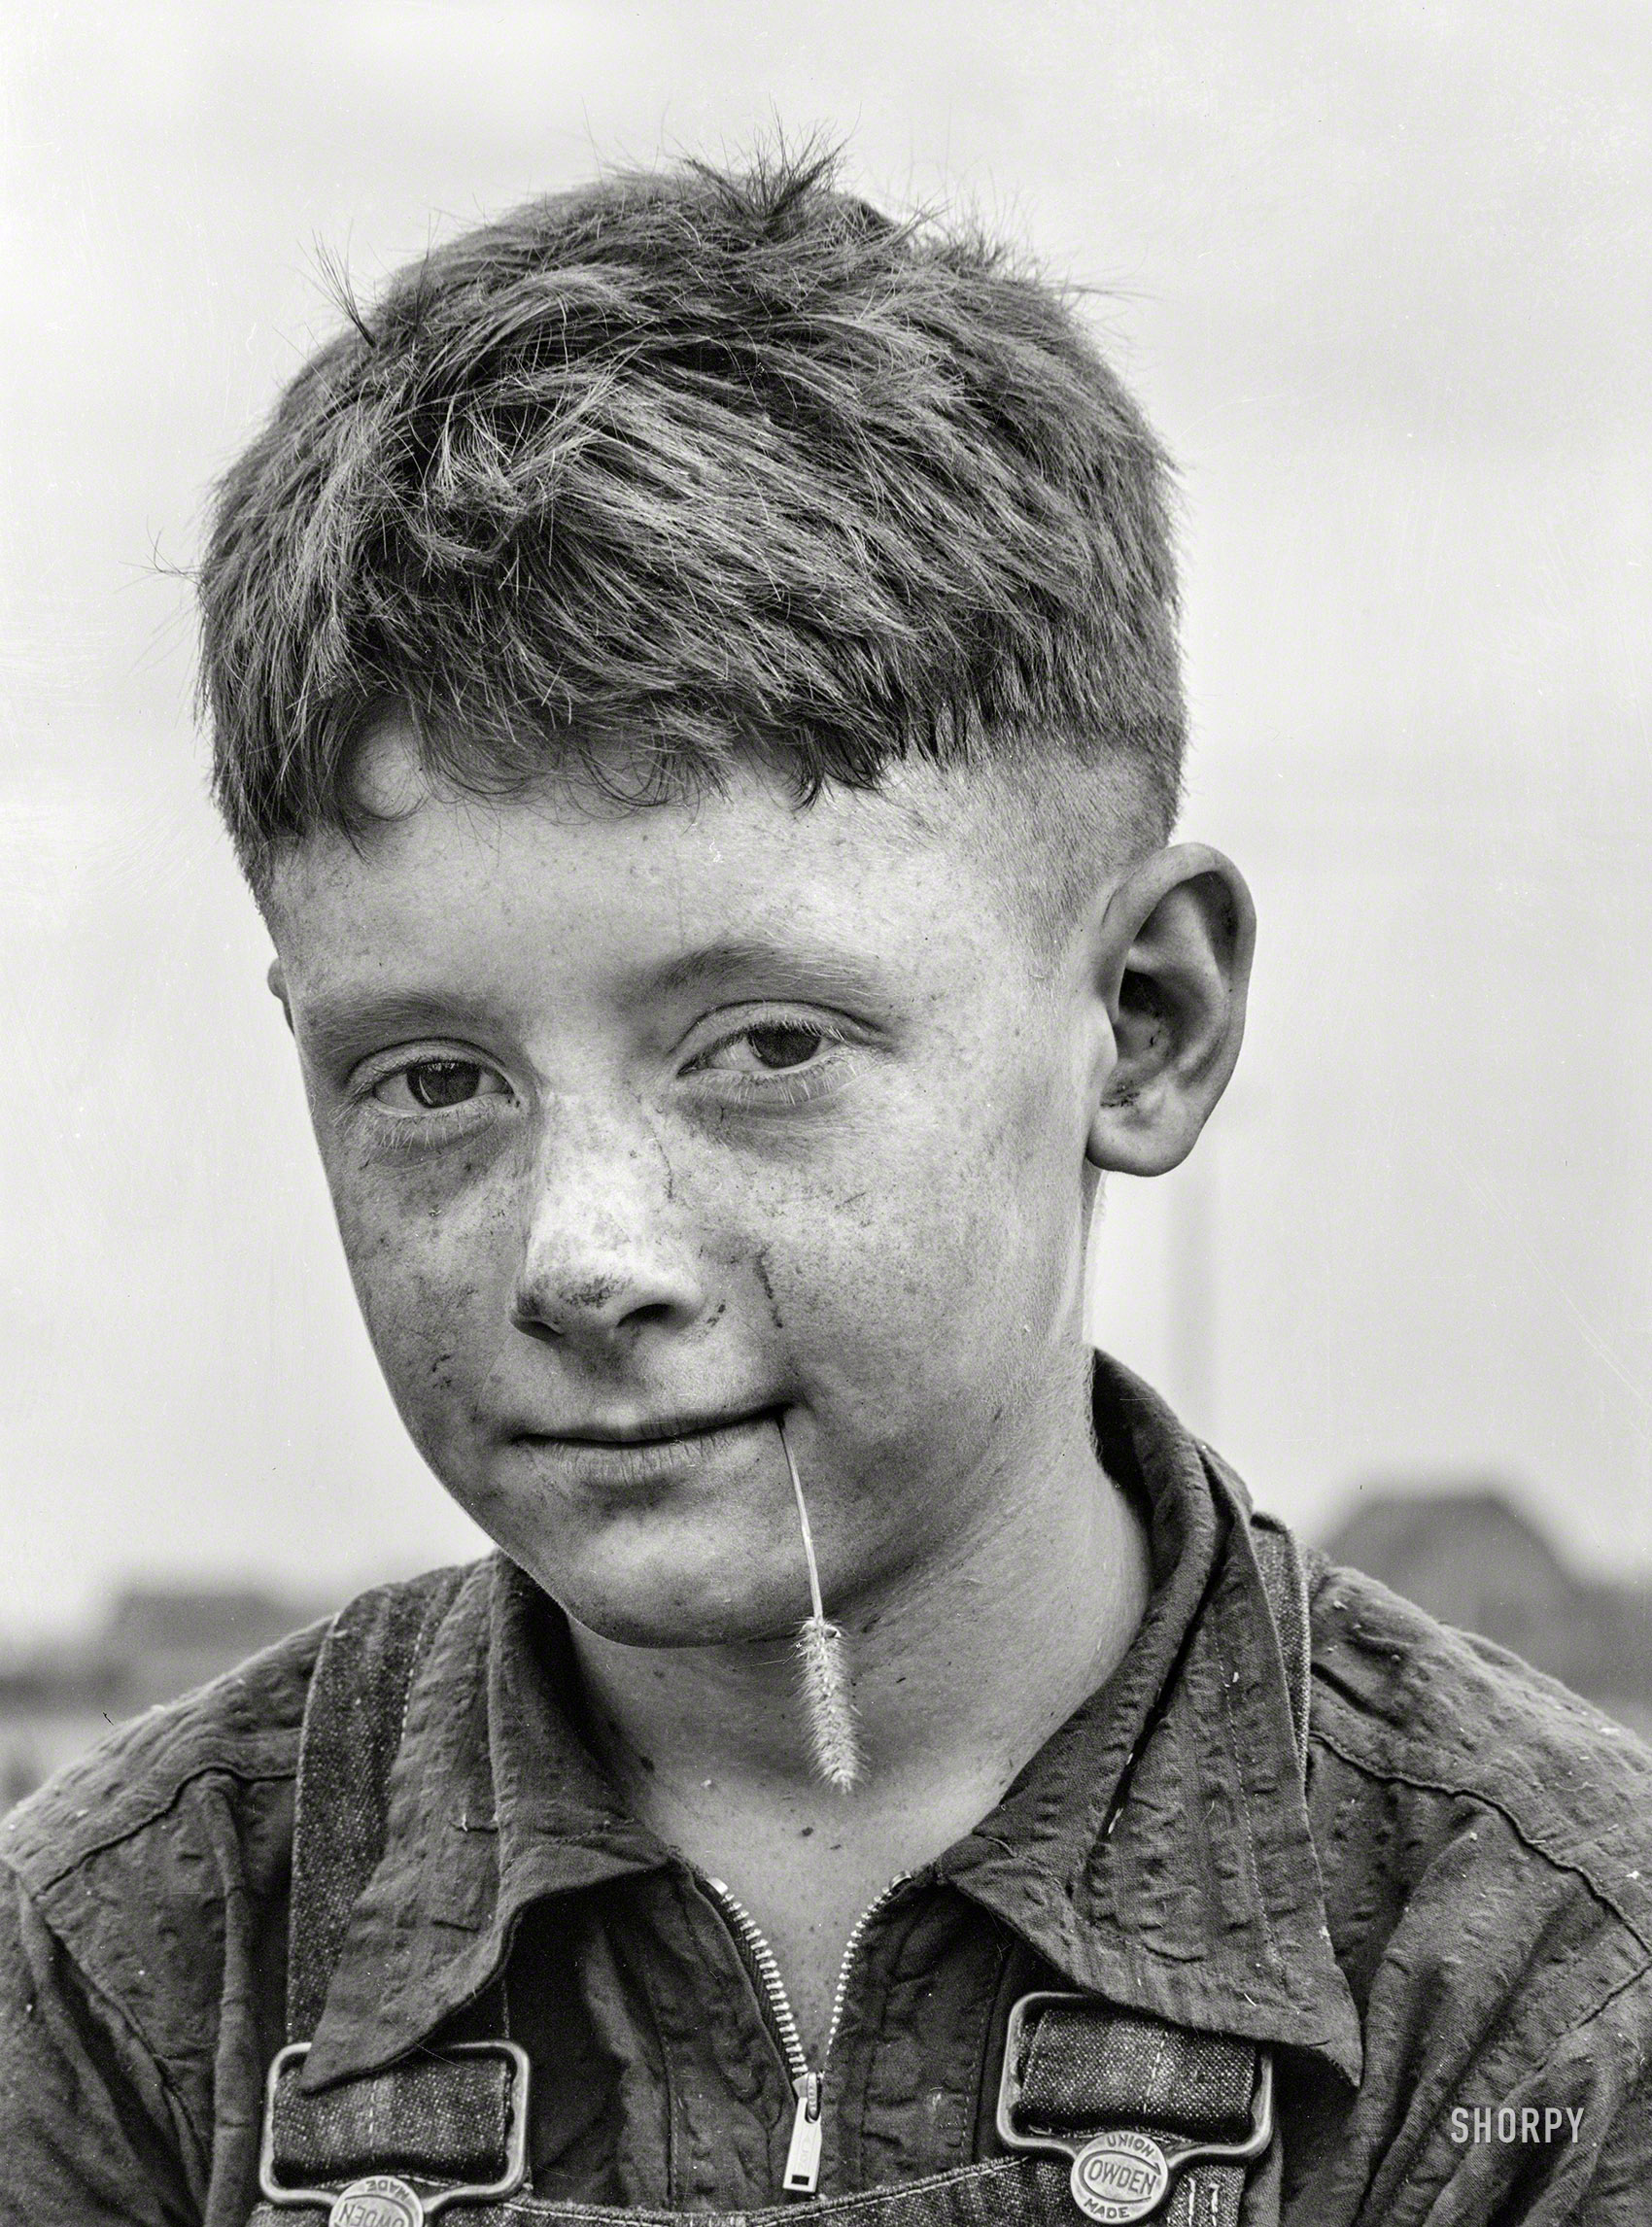 September 1939. "Son of dairy farmer. Dakota County, Minnesota." Photo by Arthur Rothstein for the Farm Security Administration. View full size.